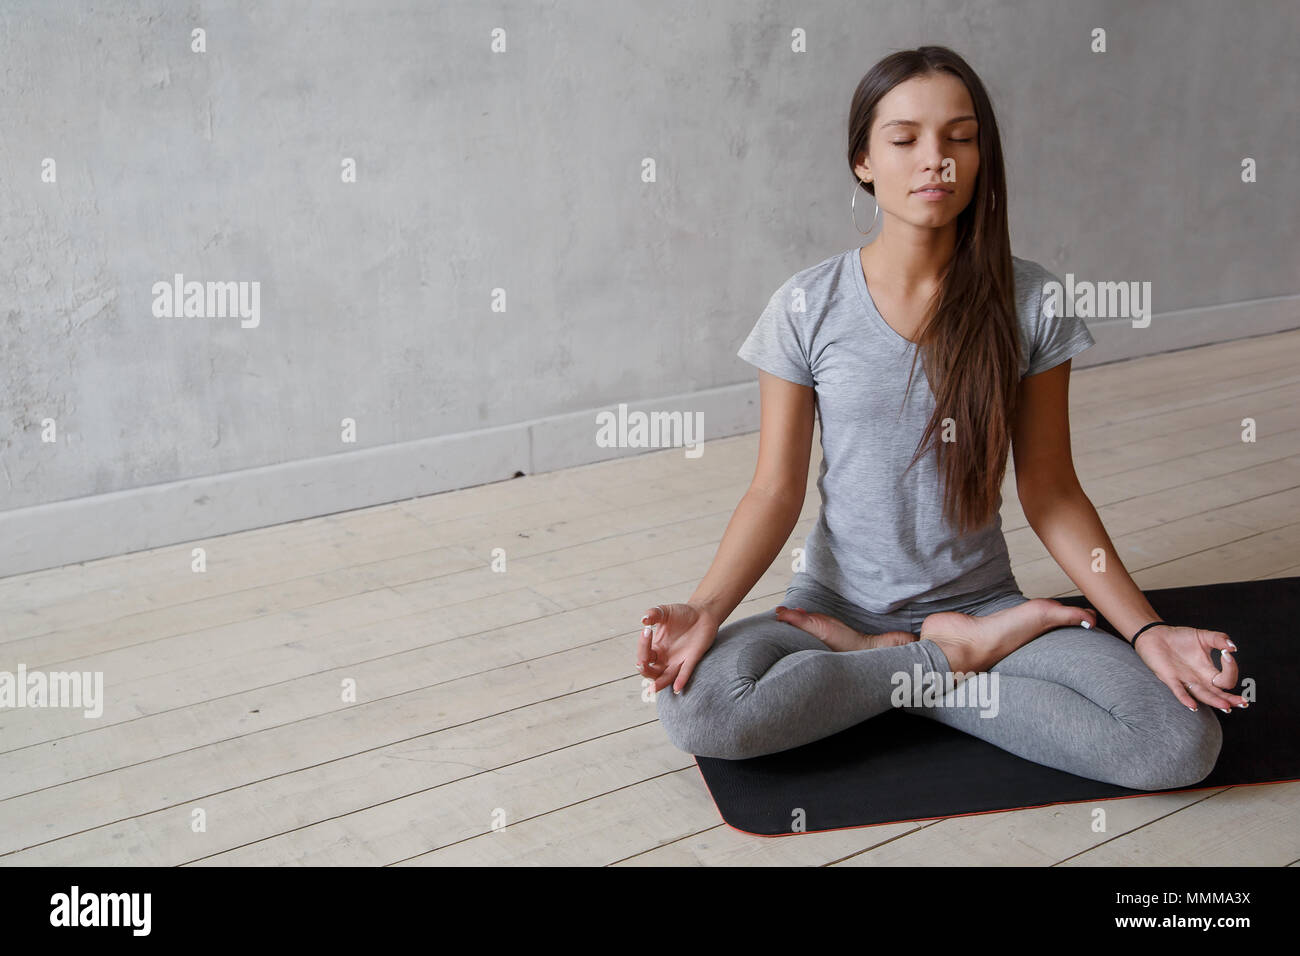 Woman Practicing Advanced Yoga Pose by Stocksy Contributor Clique Images  - Stocksy